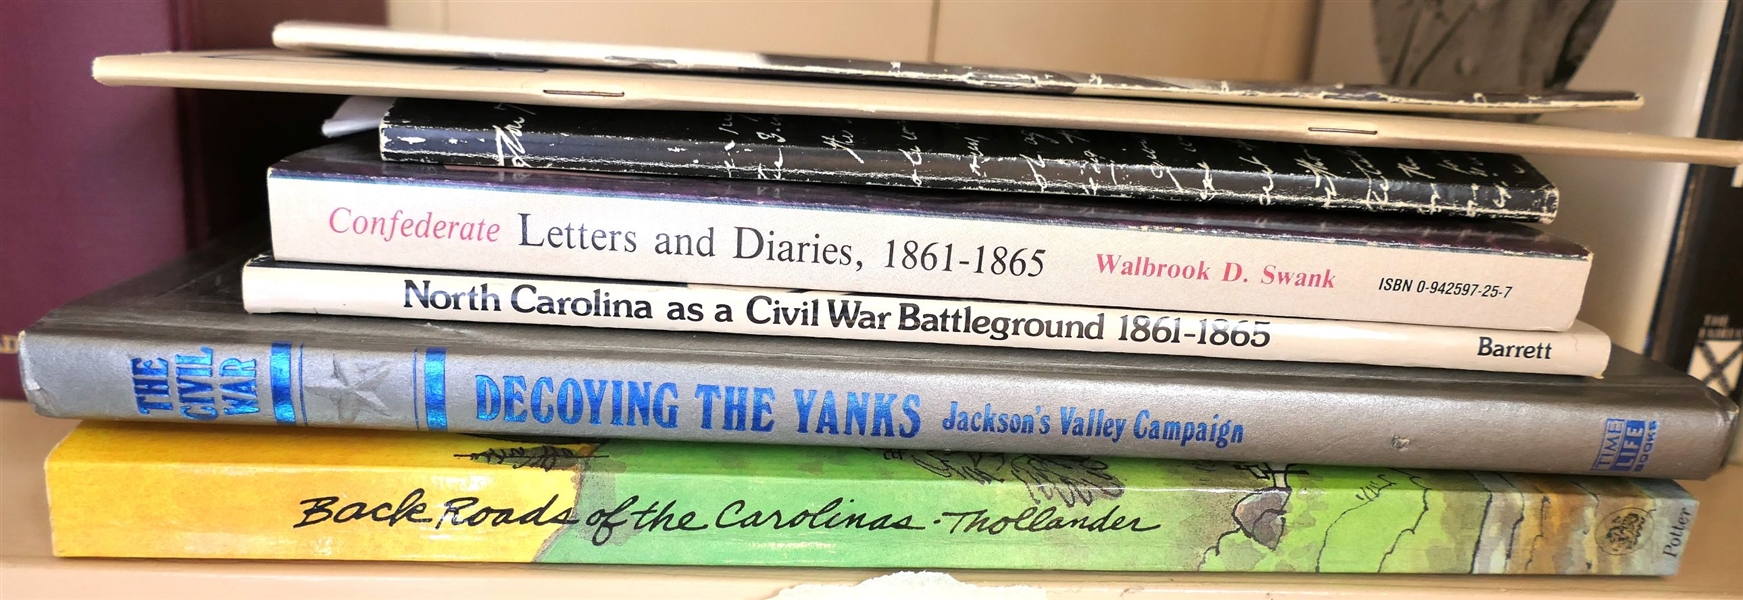 7 Books including "Back Roads of the Carolinas" "Decoying The Yanks" "North Carolina As A Civil War Battlefield" "Confederate Letters and Diaries, 1861 - 1865" "Jesse Helms and the Legacy of...